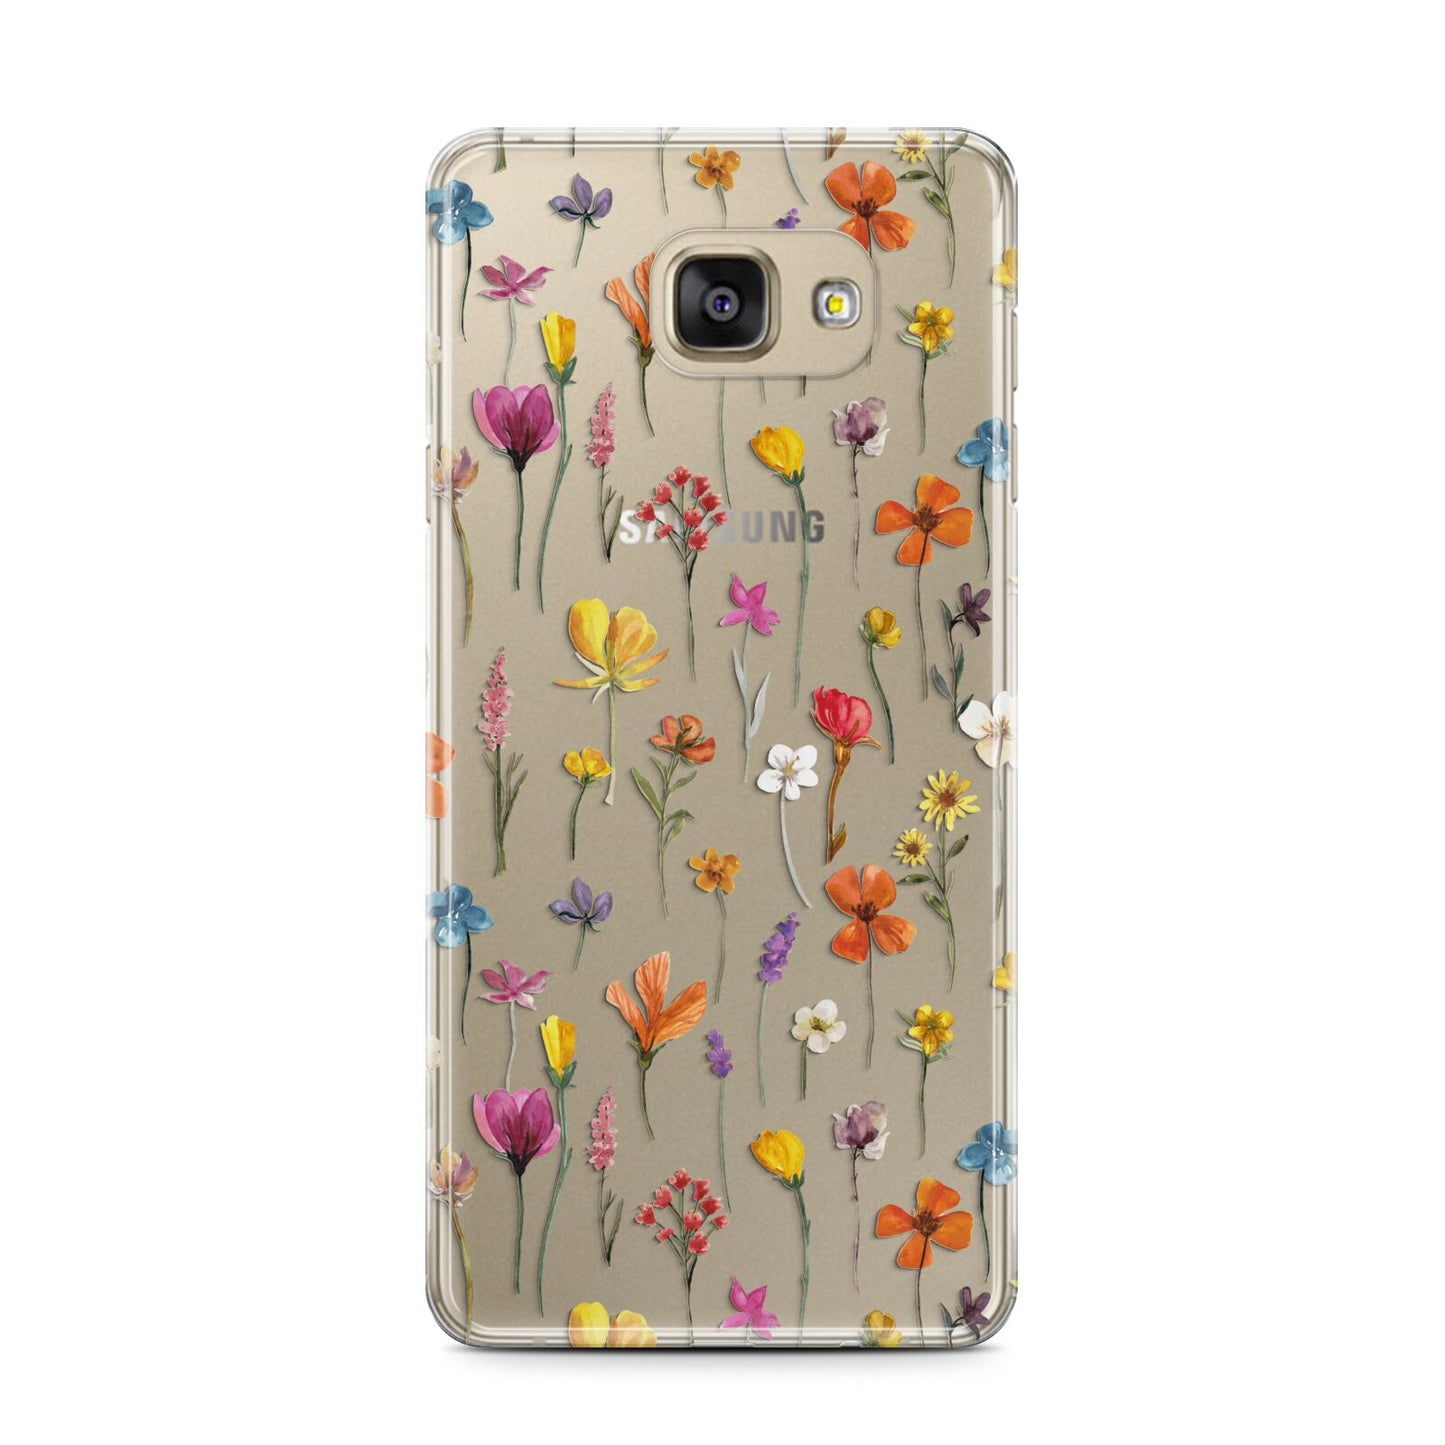 Botanical Floral Samsung Galaxy A7 2016 Case on gold phone